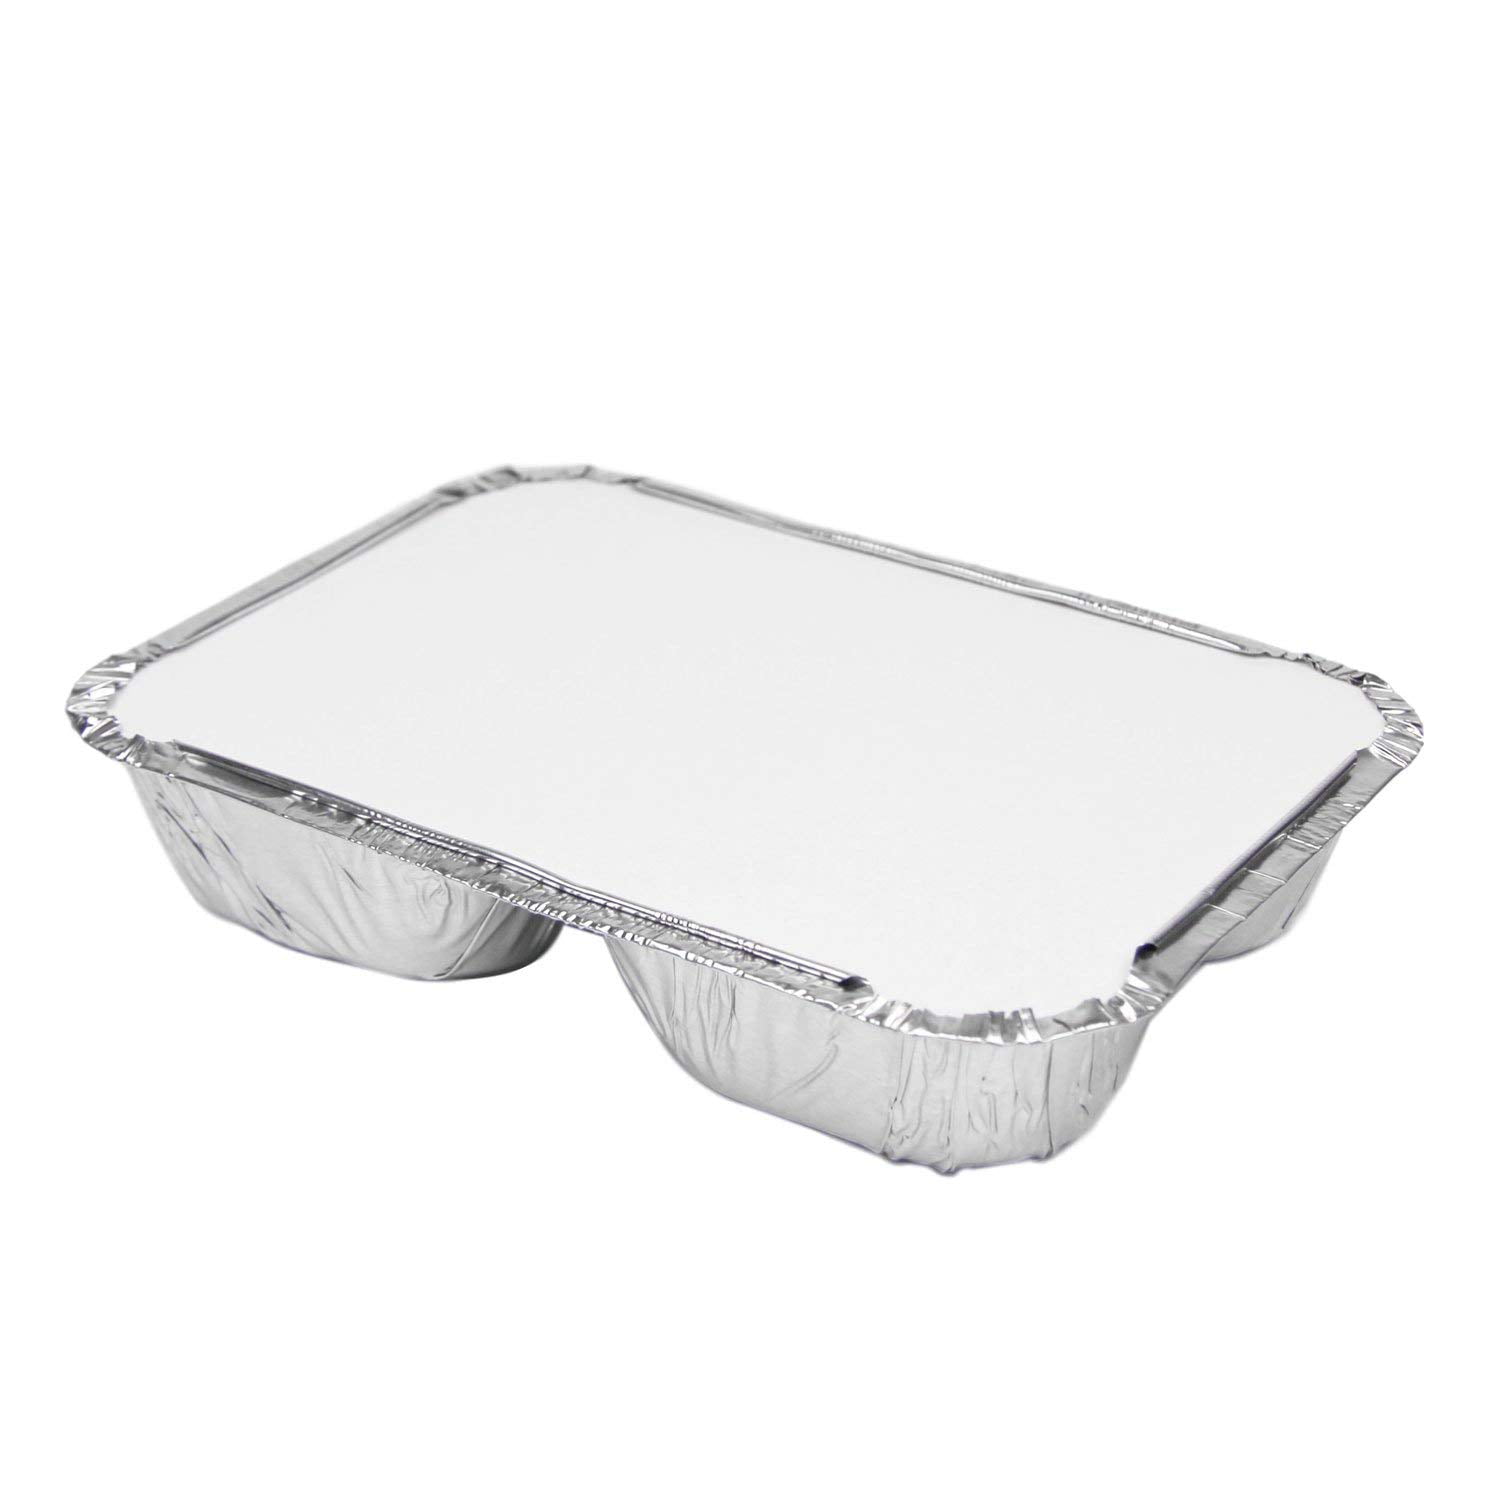 FOIL GASTRO CONTAINER  1/3RD SIZE FOIL CONTAINER